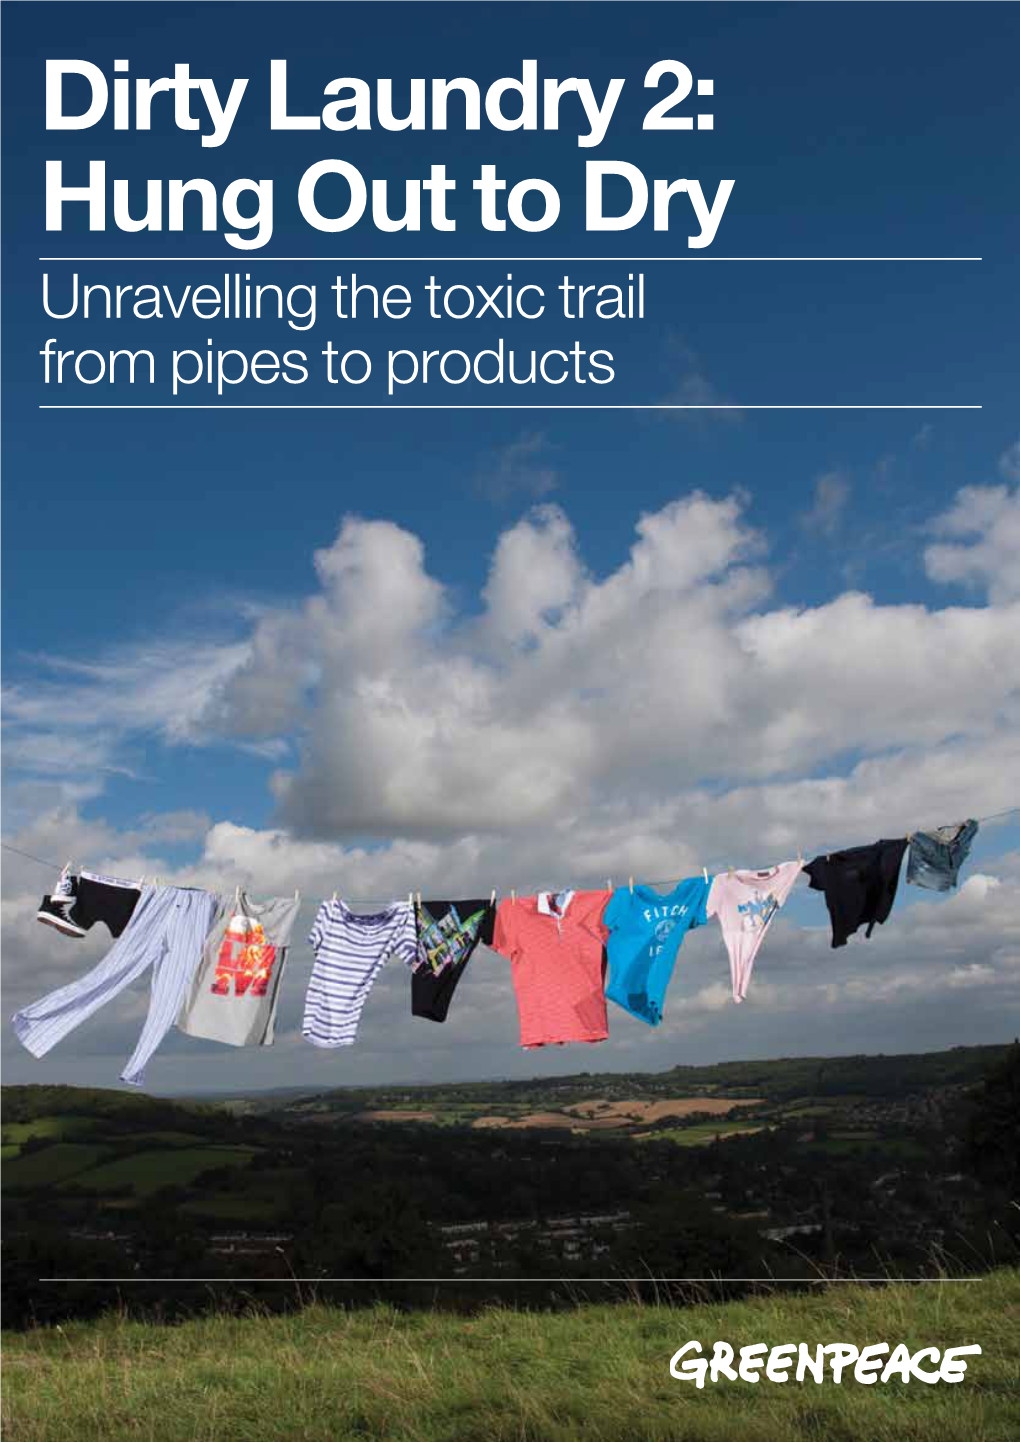 Dirty Laundry 2: Hung out to Dry Unravelling the Toxic Trail from Pipes to Products Contents